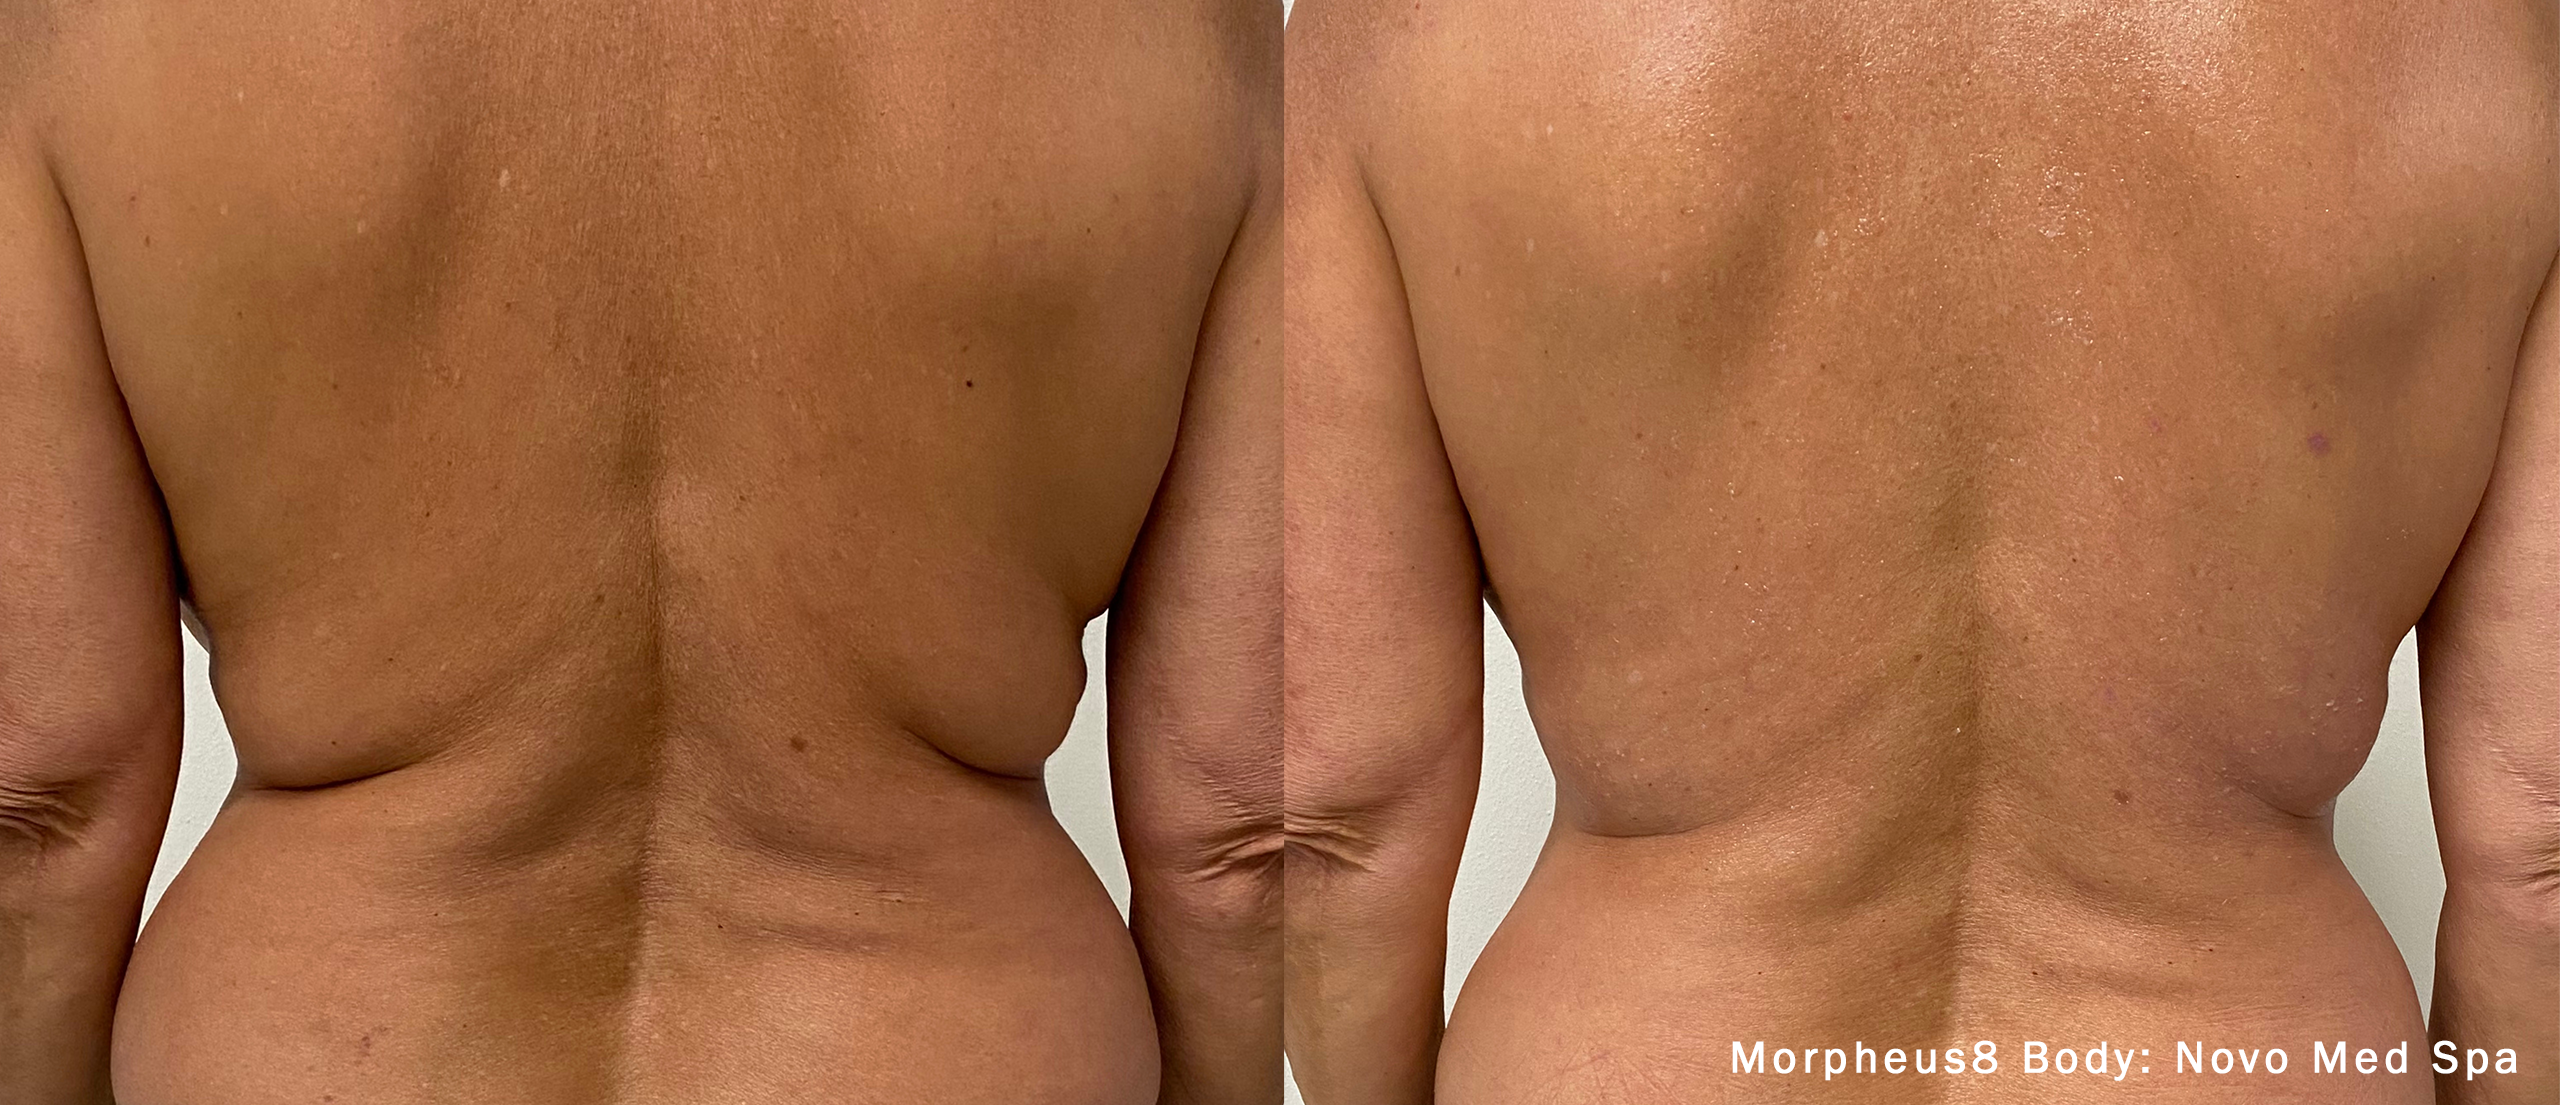 Before and After of Morpheus8 Body Treatment 